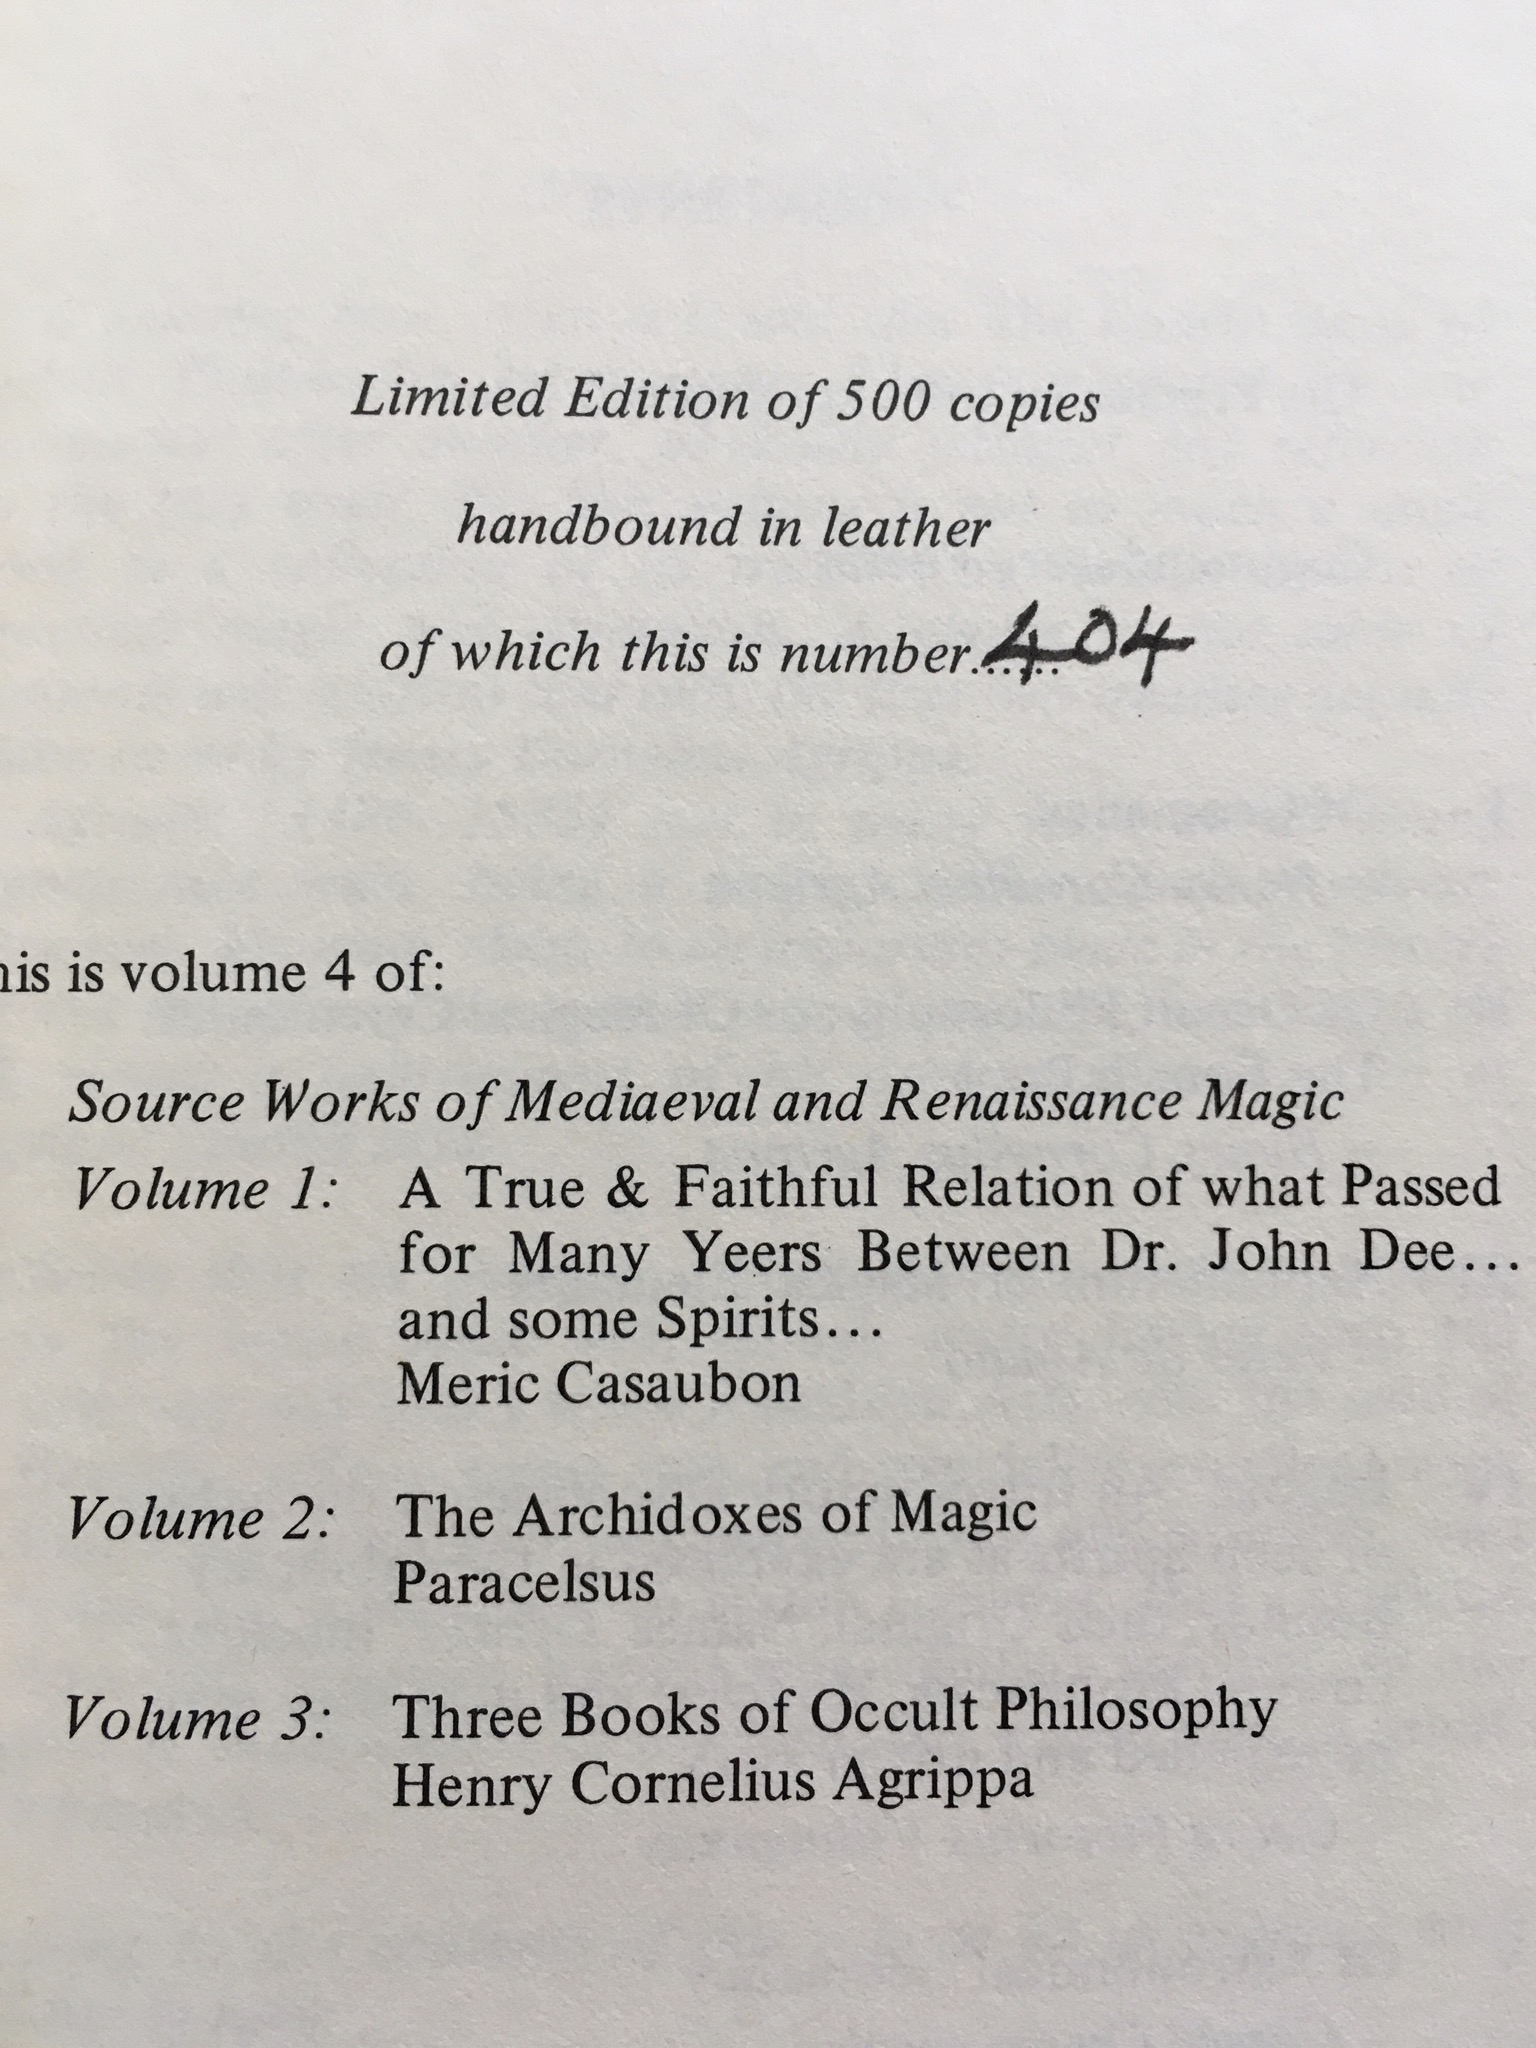 The Fourth Book Of Occult Philosophy by Henry Cornelius Agrippa